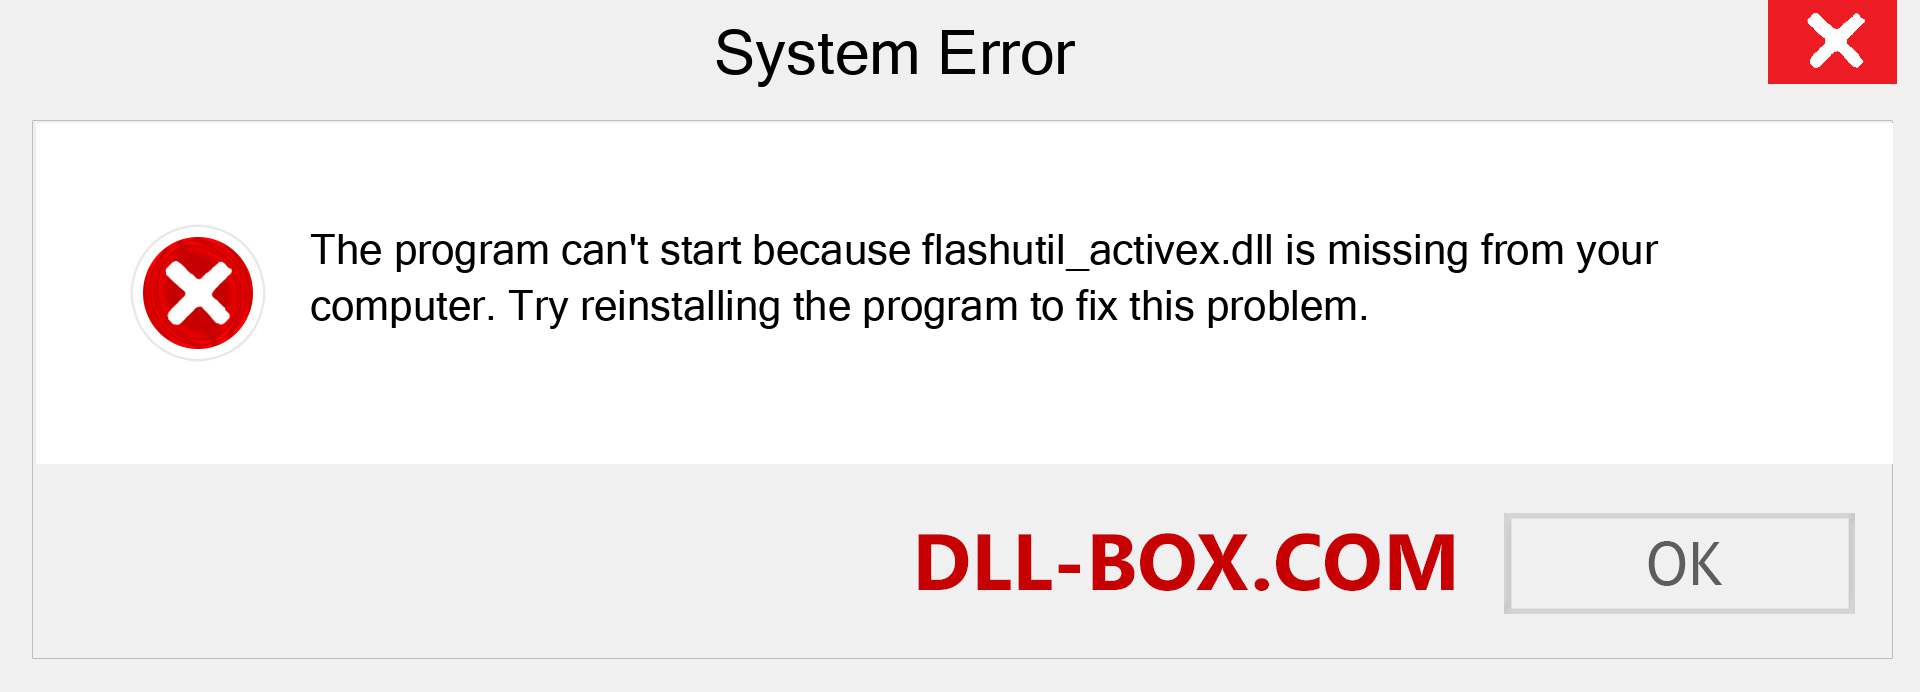  flashutil_activex.dll file is missing?. Download for Windows 7, 8, 10 - Fix  flashutil_activex dll Missing Error on Windows, photos, images